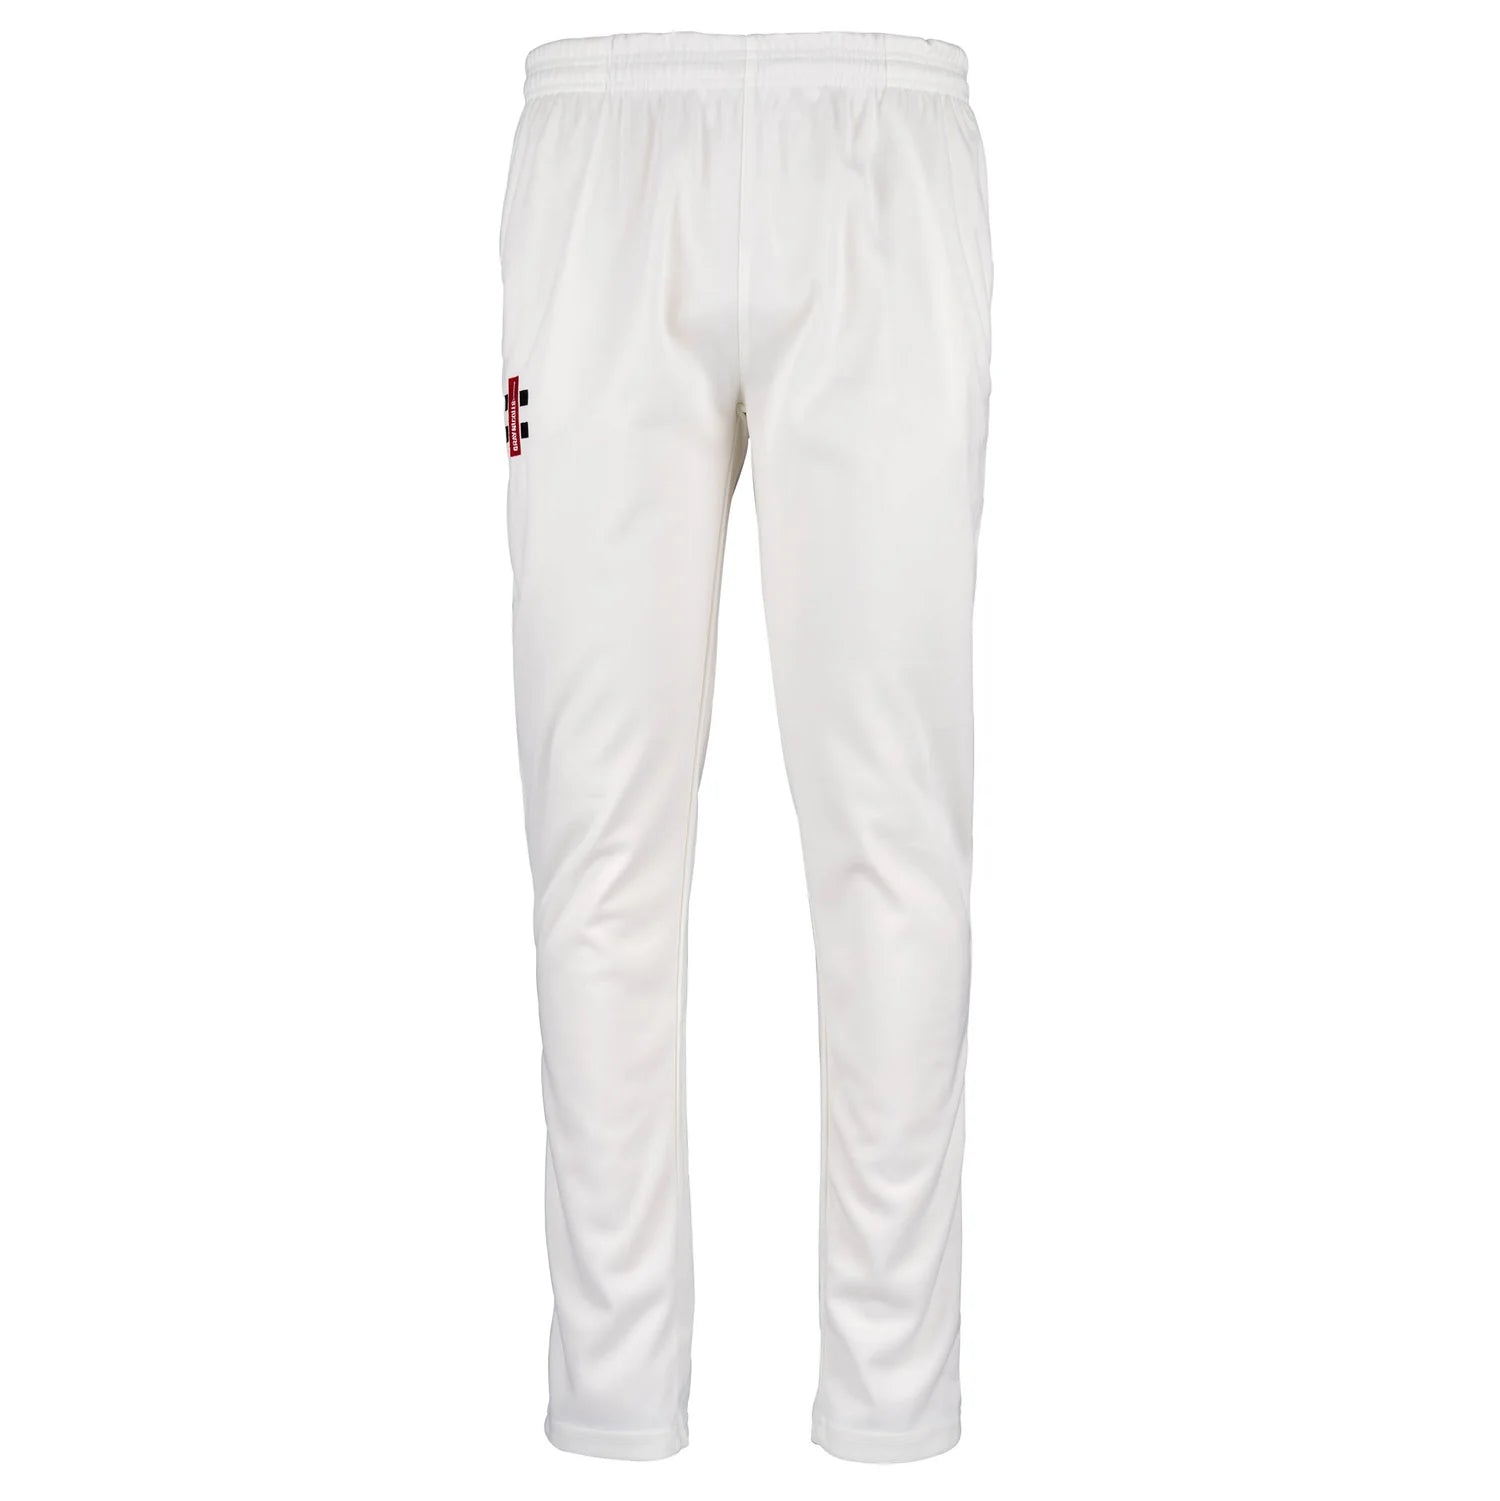 Hawarden Park Ladies Match Trousers - Queensferry Sports